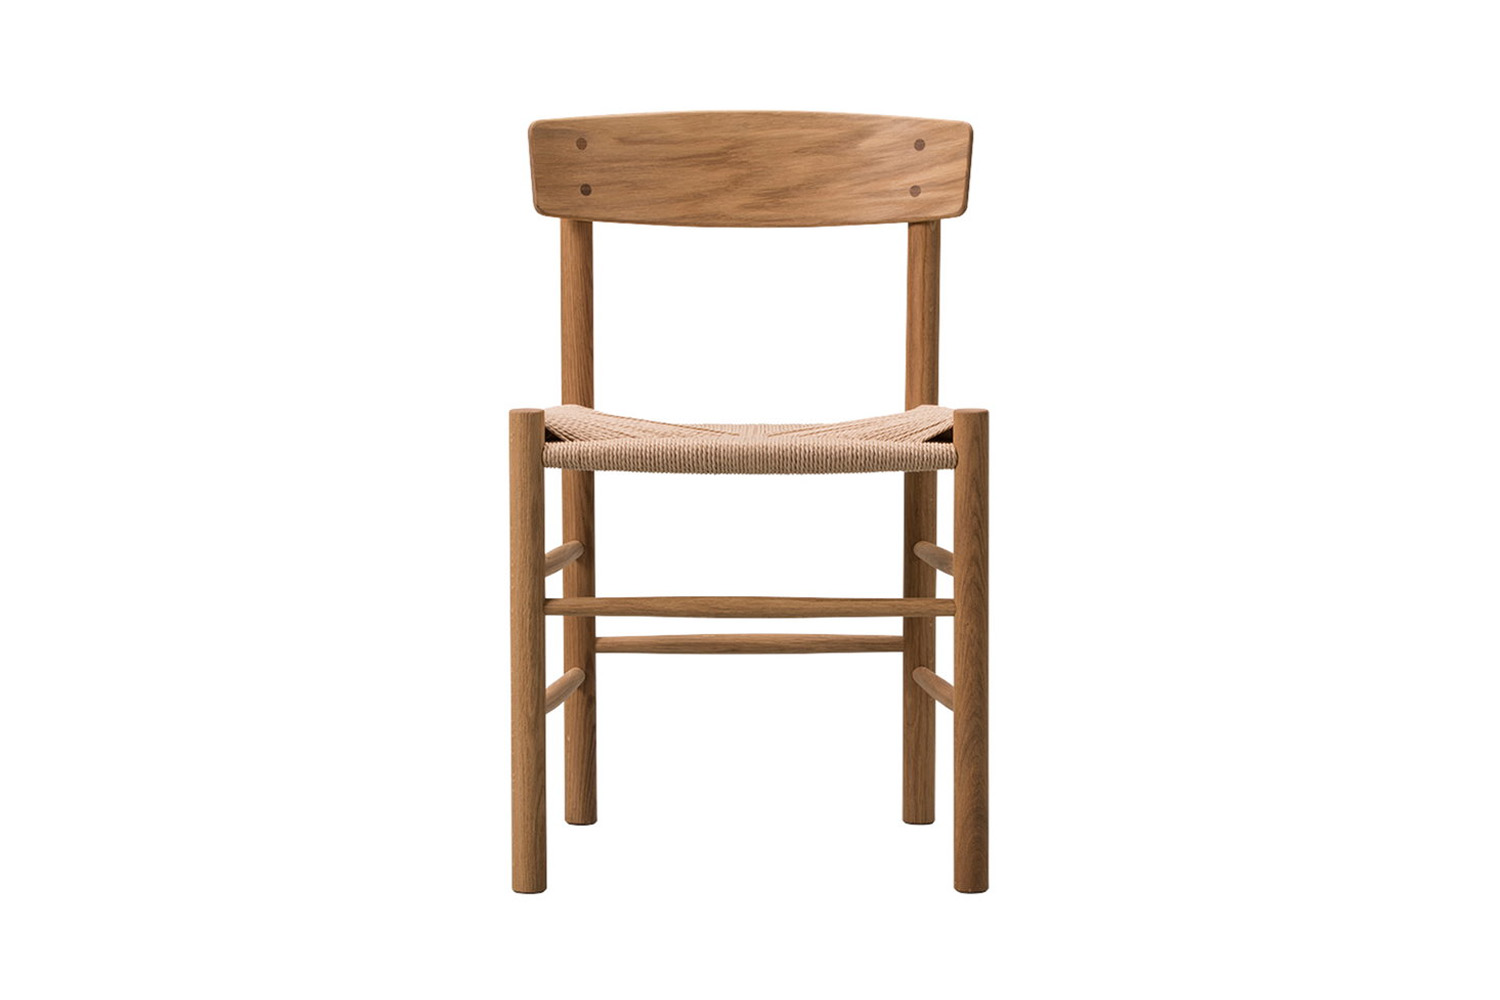 the børge mogensen j39 chair in oiled oak is \$6\25.50 at finnish design s 16